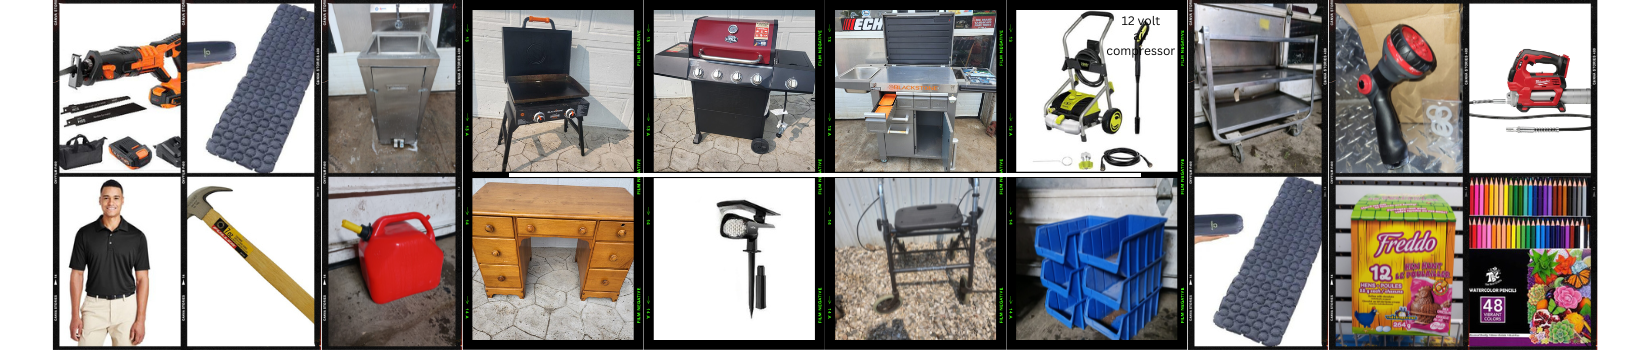 Zehr's Sales May 25th Lawn Mower, Equipment, Tools and Much More Online Auction